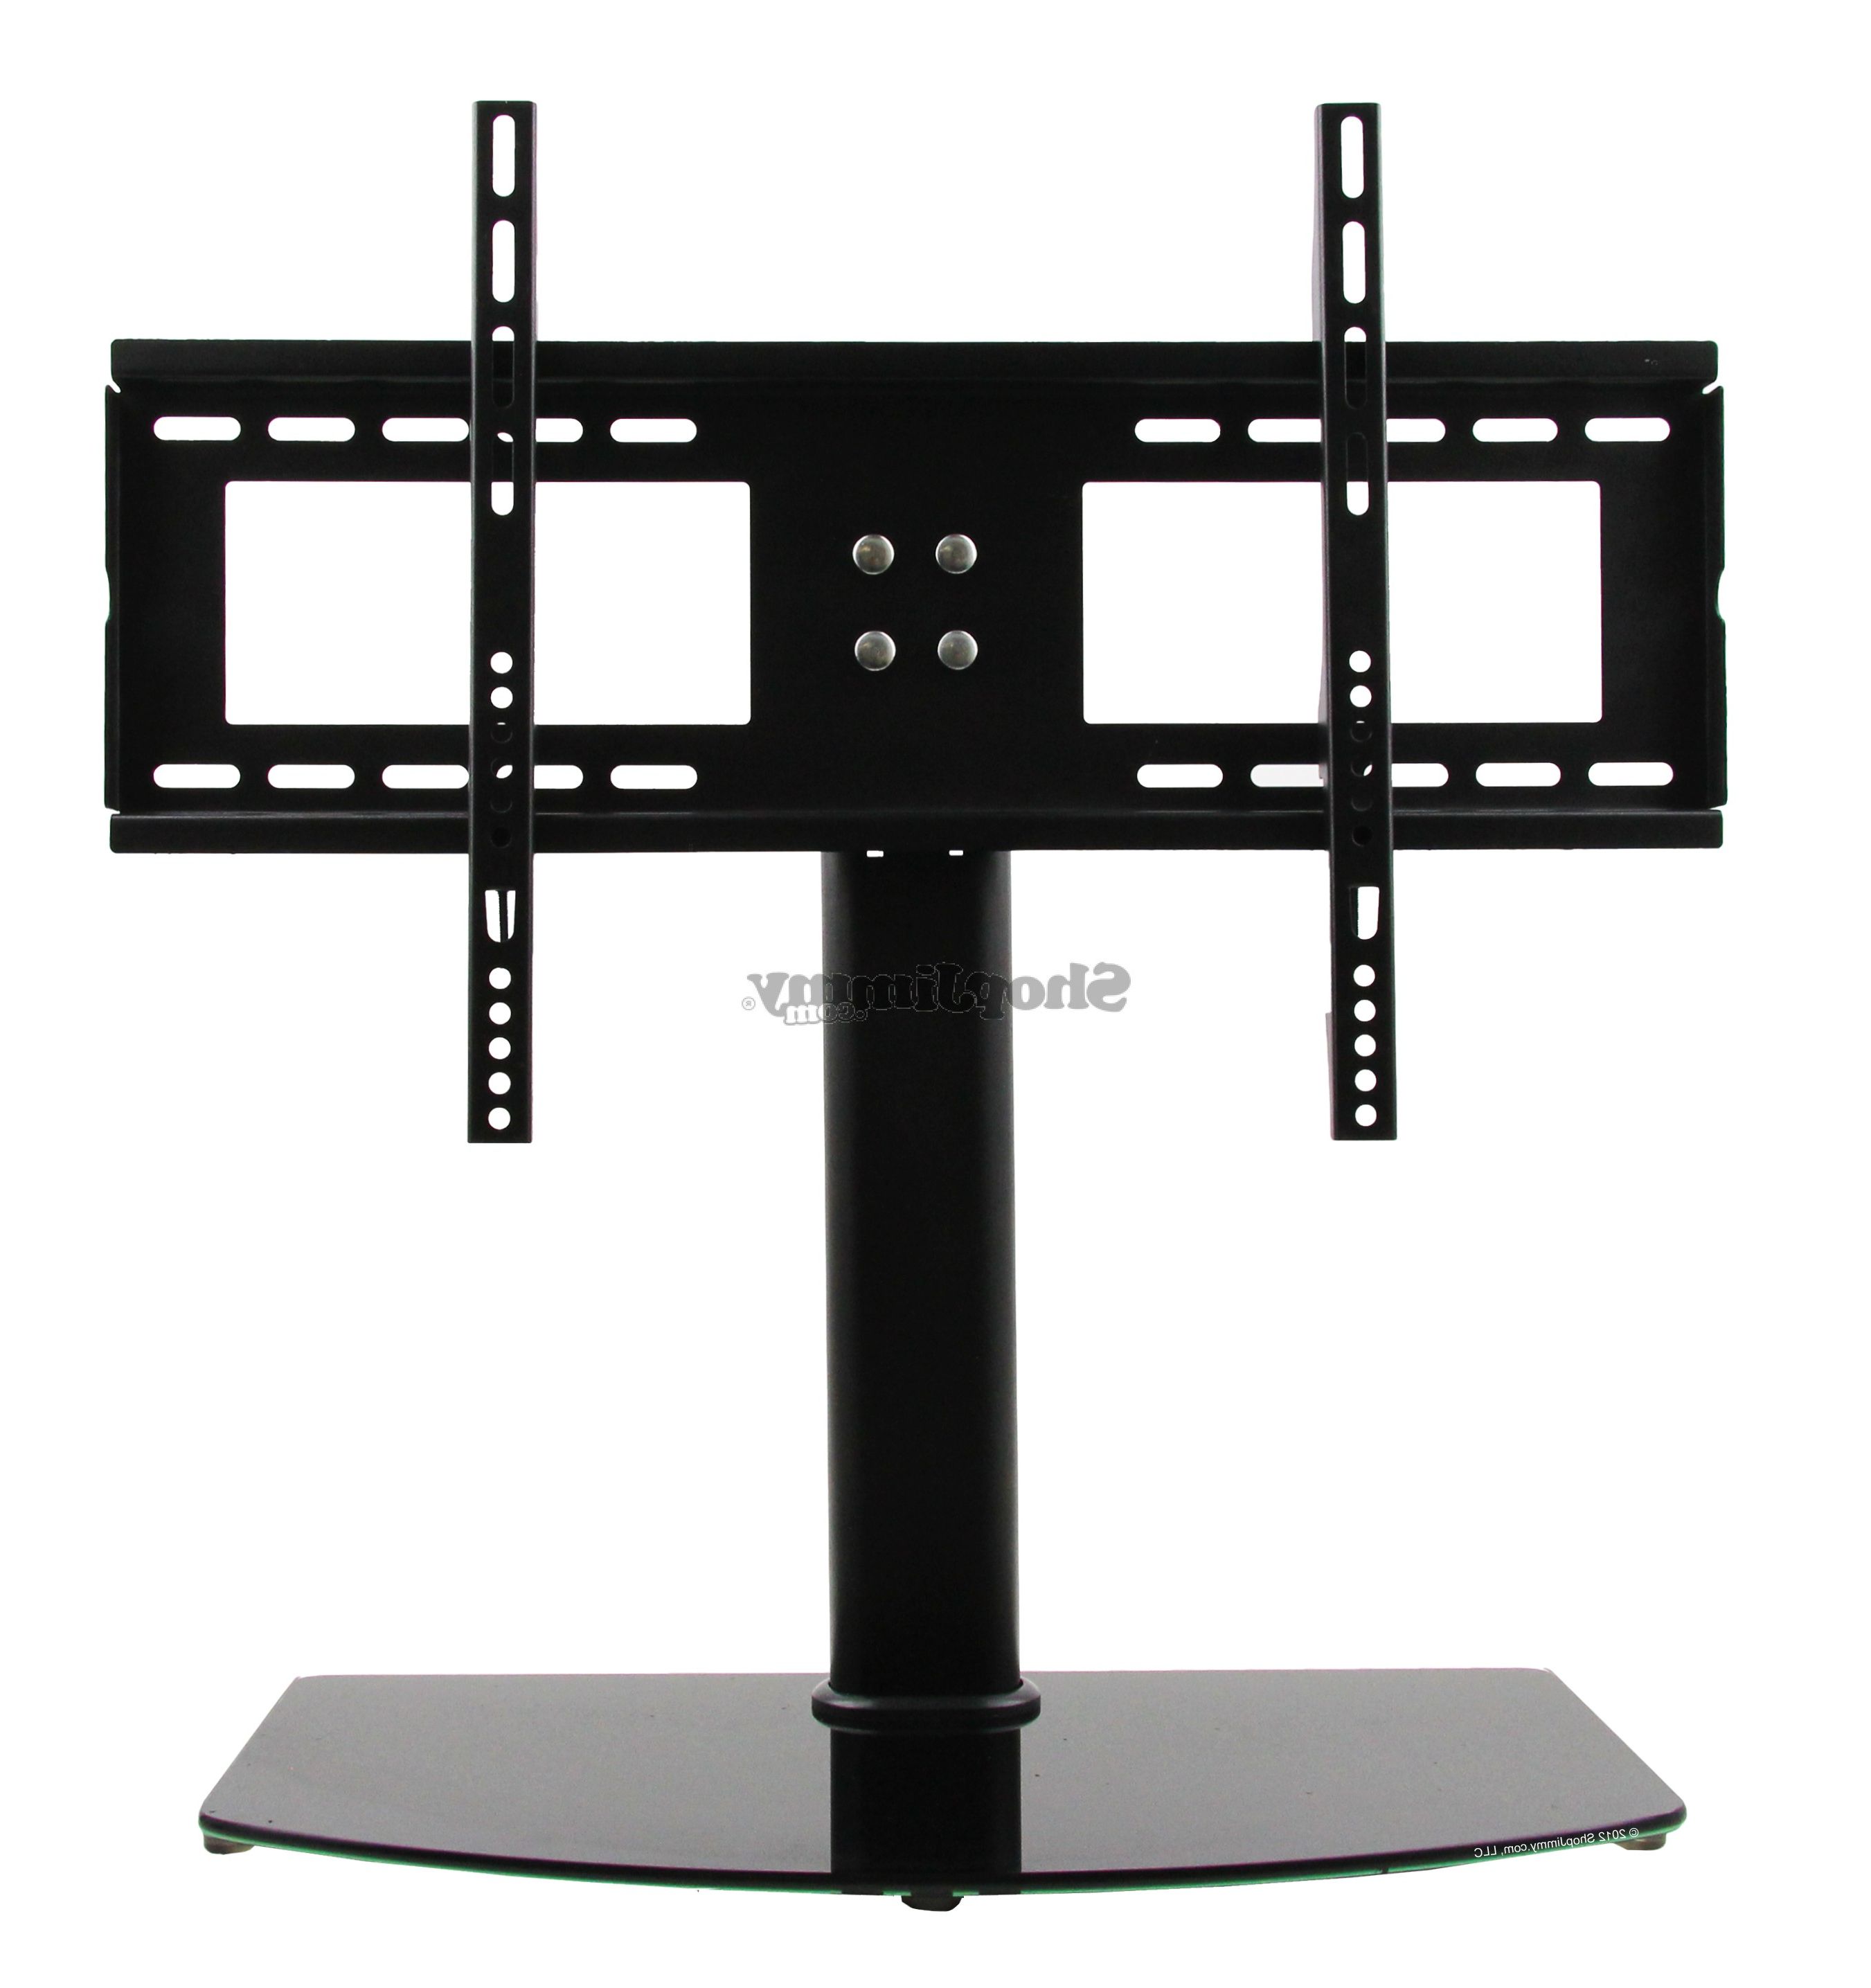 Universal Tv Stand/base + Wall Mount For 37" 55" Flat Screen Tvs For Most Recently Released Universal Flat Screen Tv Stands (View 1 of 20)